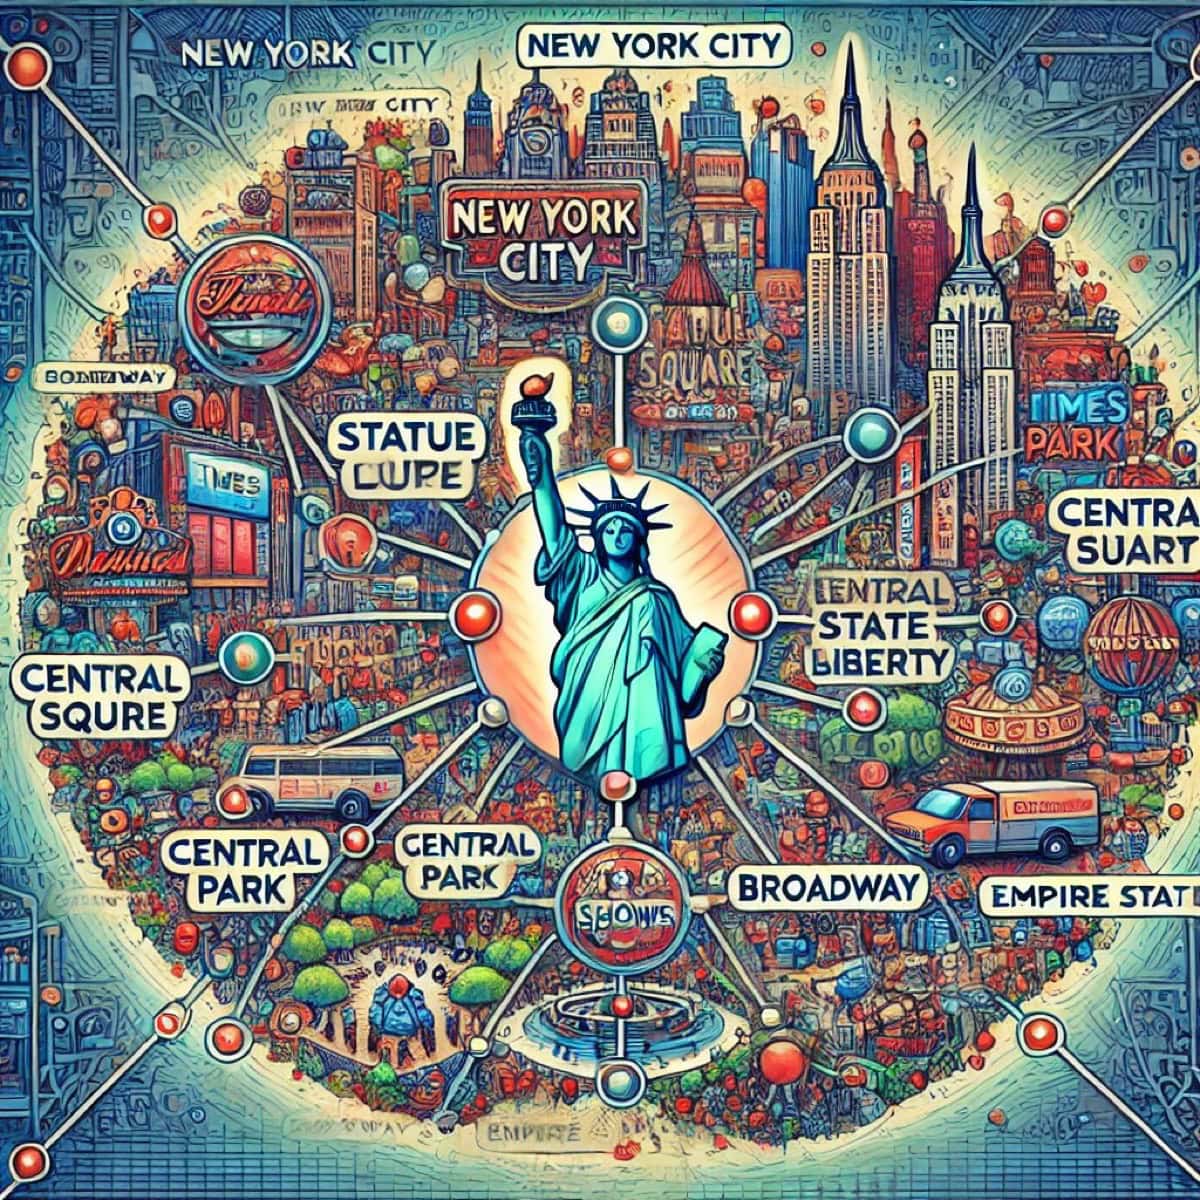 A vibrant, artistic map of New York City centers around the Statue of Liberty, with illustrated landmarks like Central Park, Times Square, Broadway, and the Empire State Building. Surrounded by whimsical icons and cityscapes, text labels provide a semantic search feel to highlight the locations.